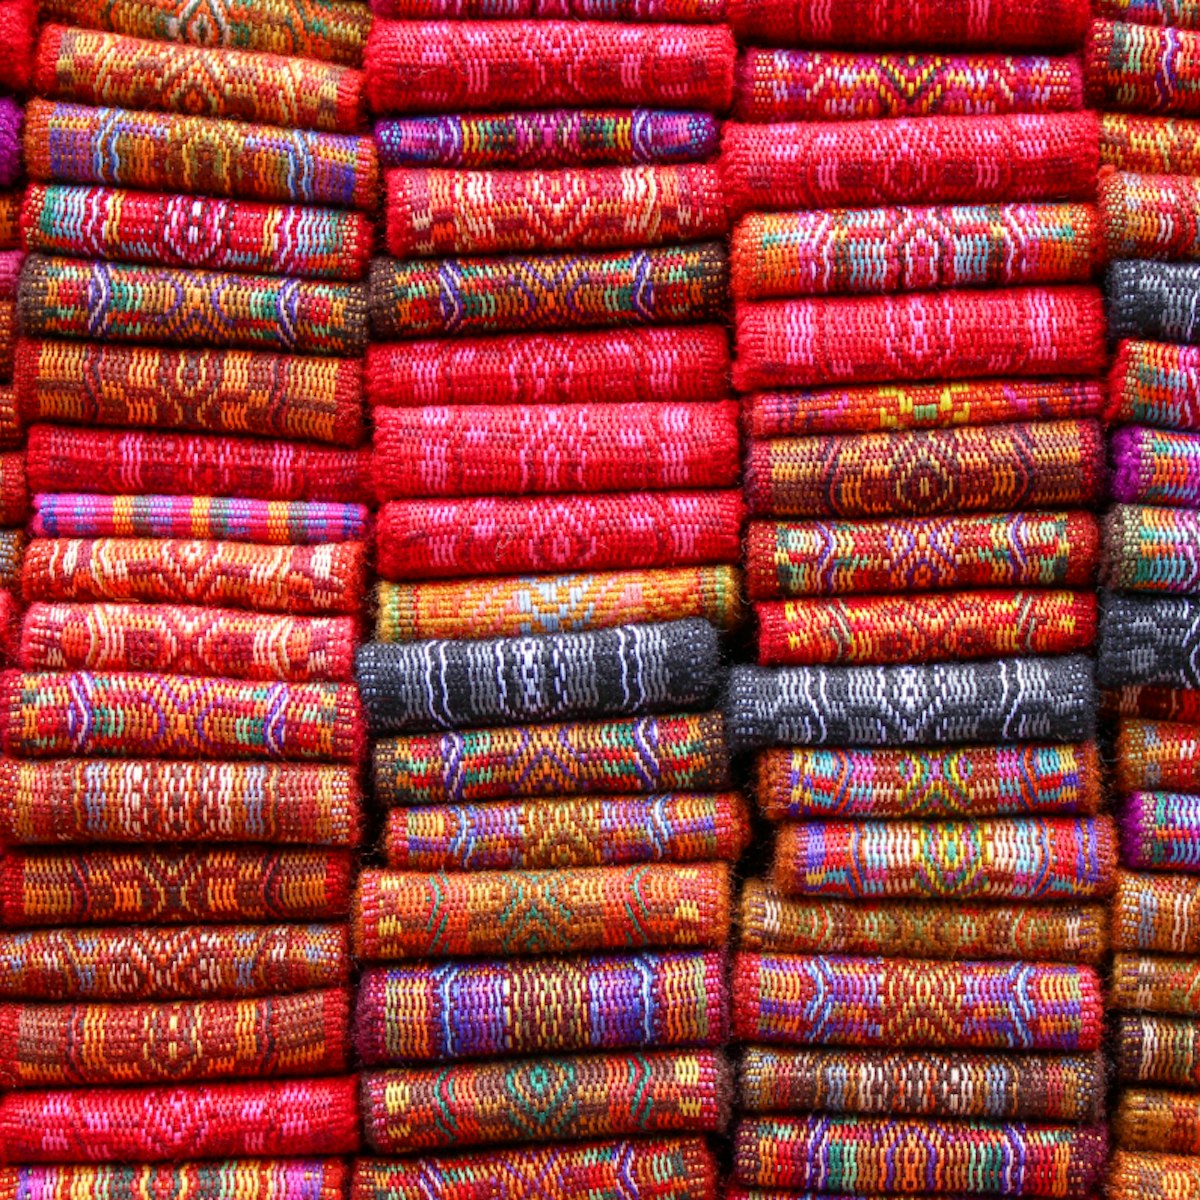 500px Photo ID: 143362997 - Handmade woven sashes for sale at the outdoor craft market in Otavalo, Ecuador